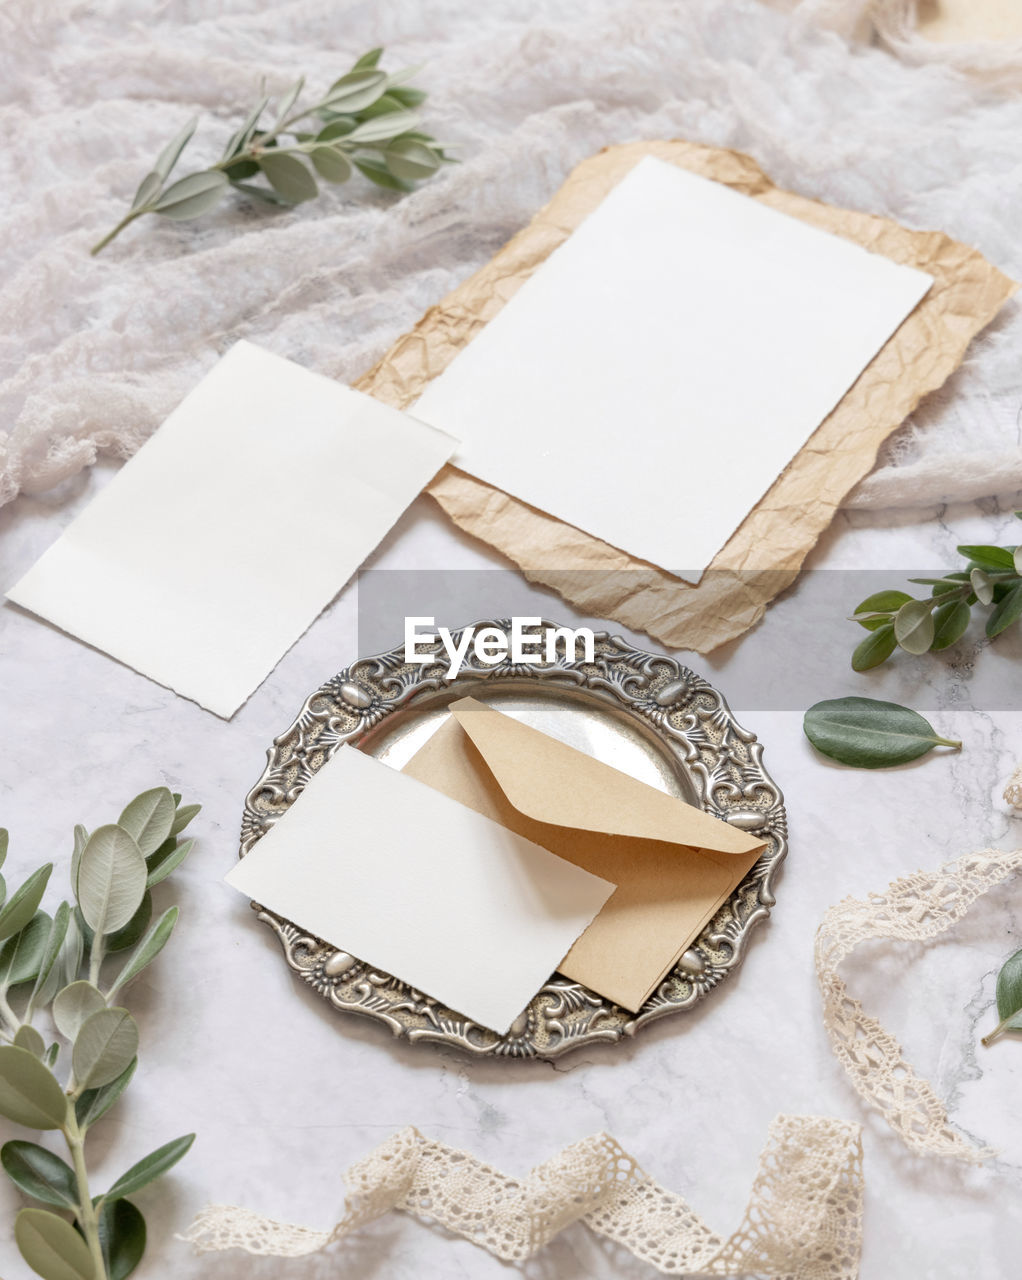 Wedding stationery set with envelope laying on a marble table decorated with eucalyptus and ribbons